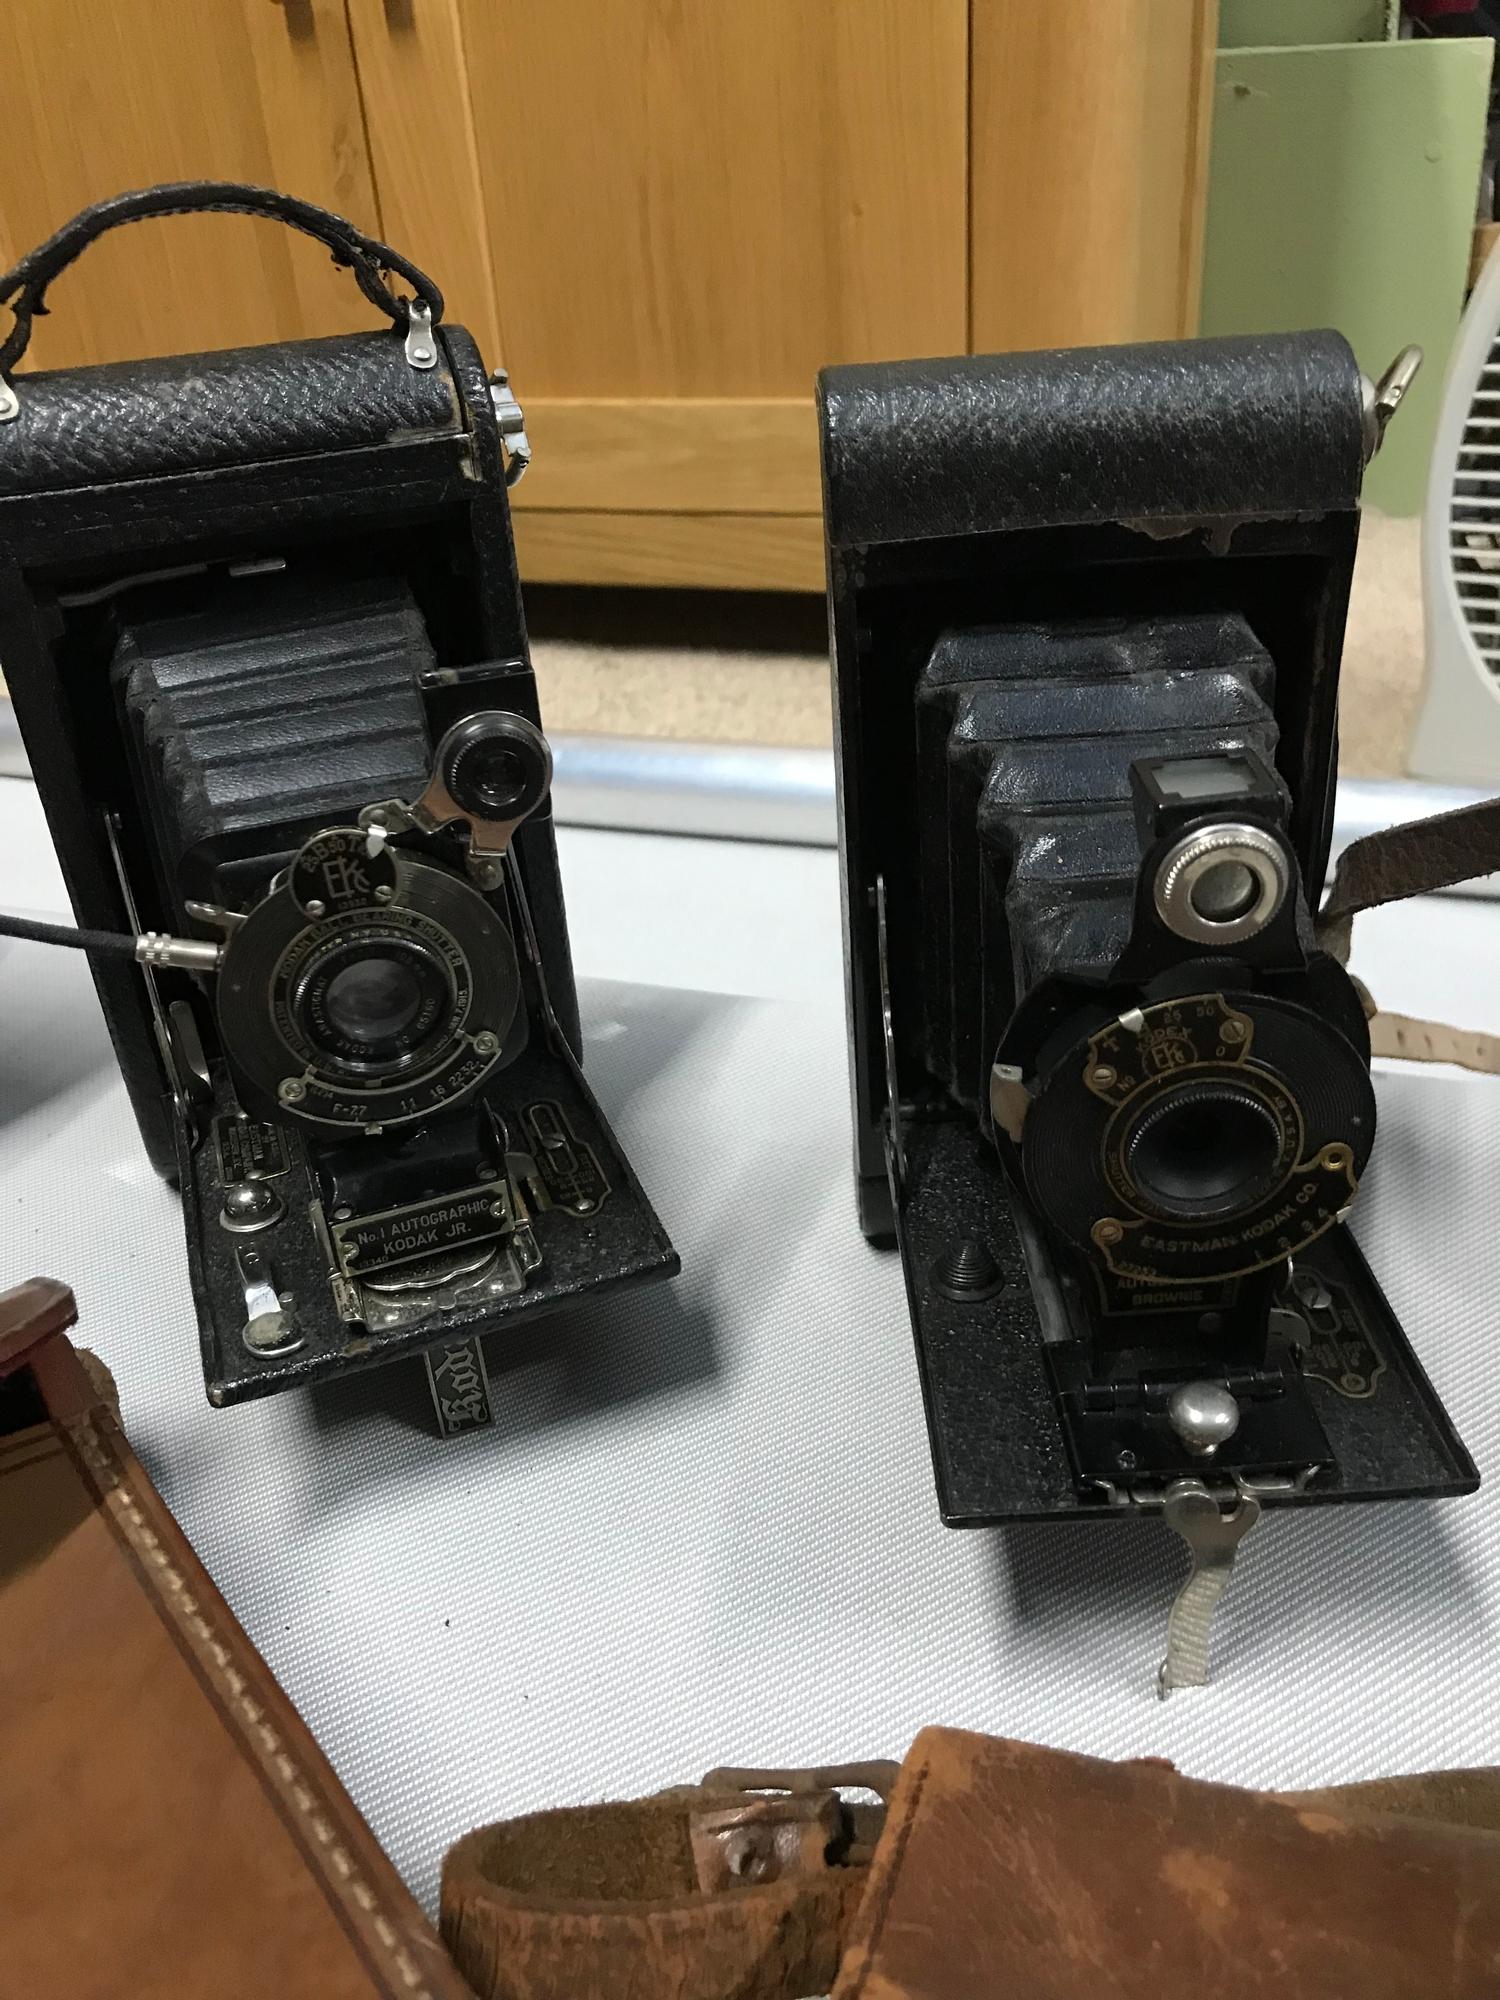 A Quantity of vintage cameras which includes Kodak Bellows, Brownie and Halina Prefect camera. - Image 4 of 4